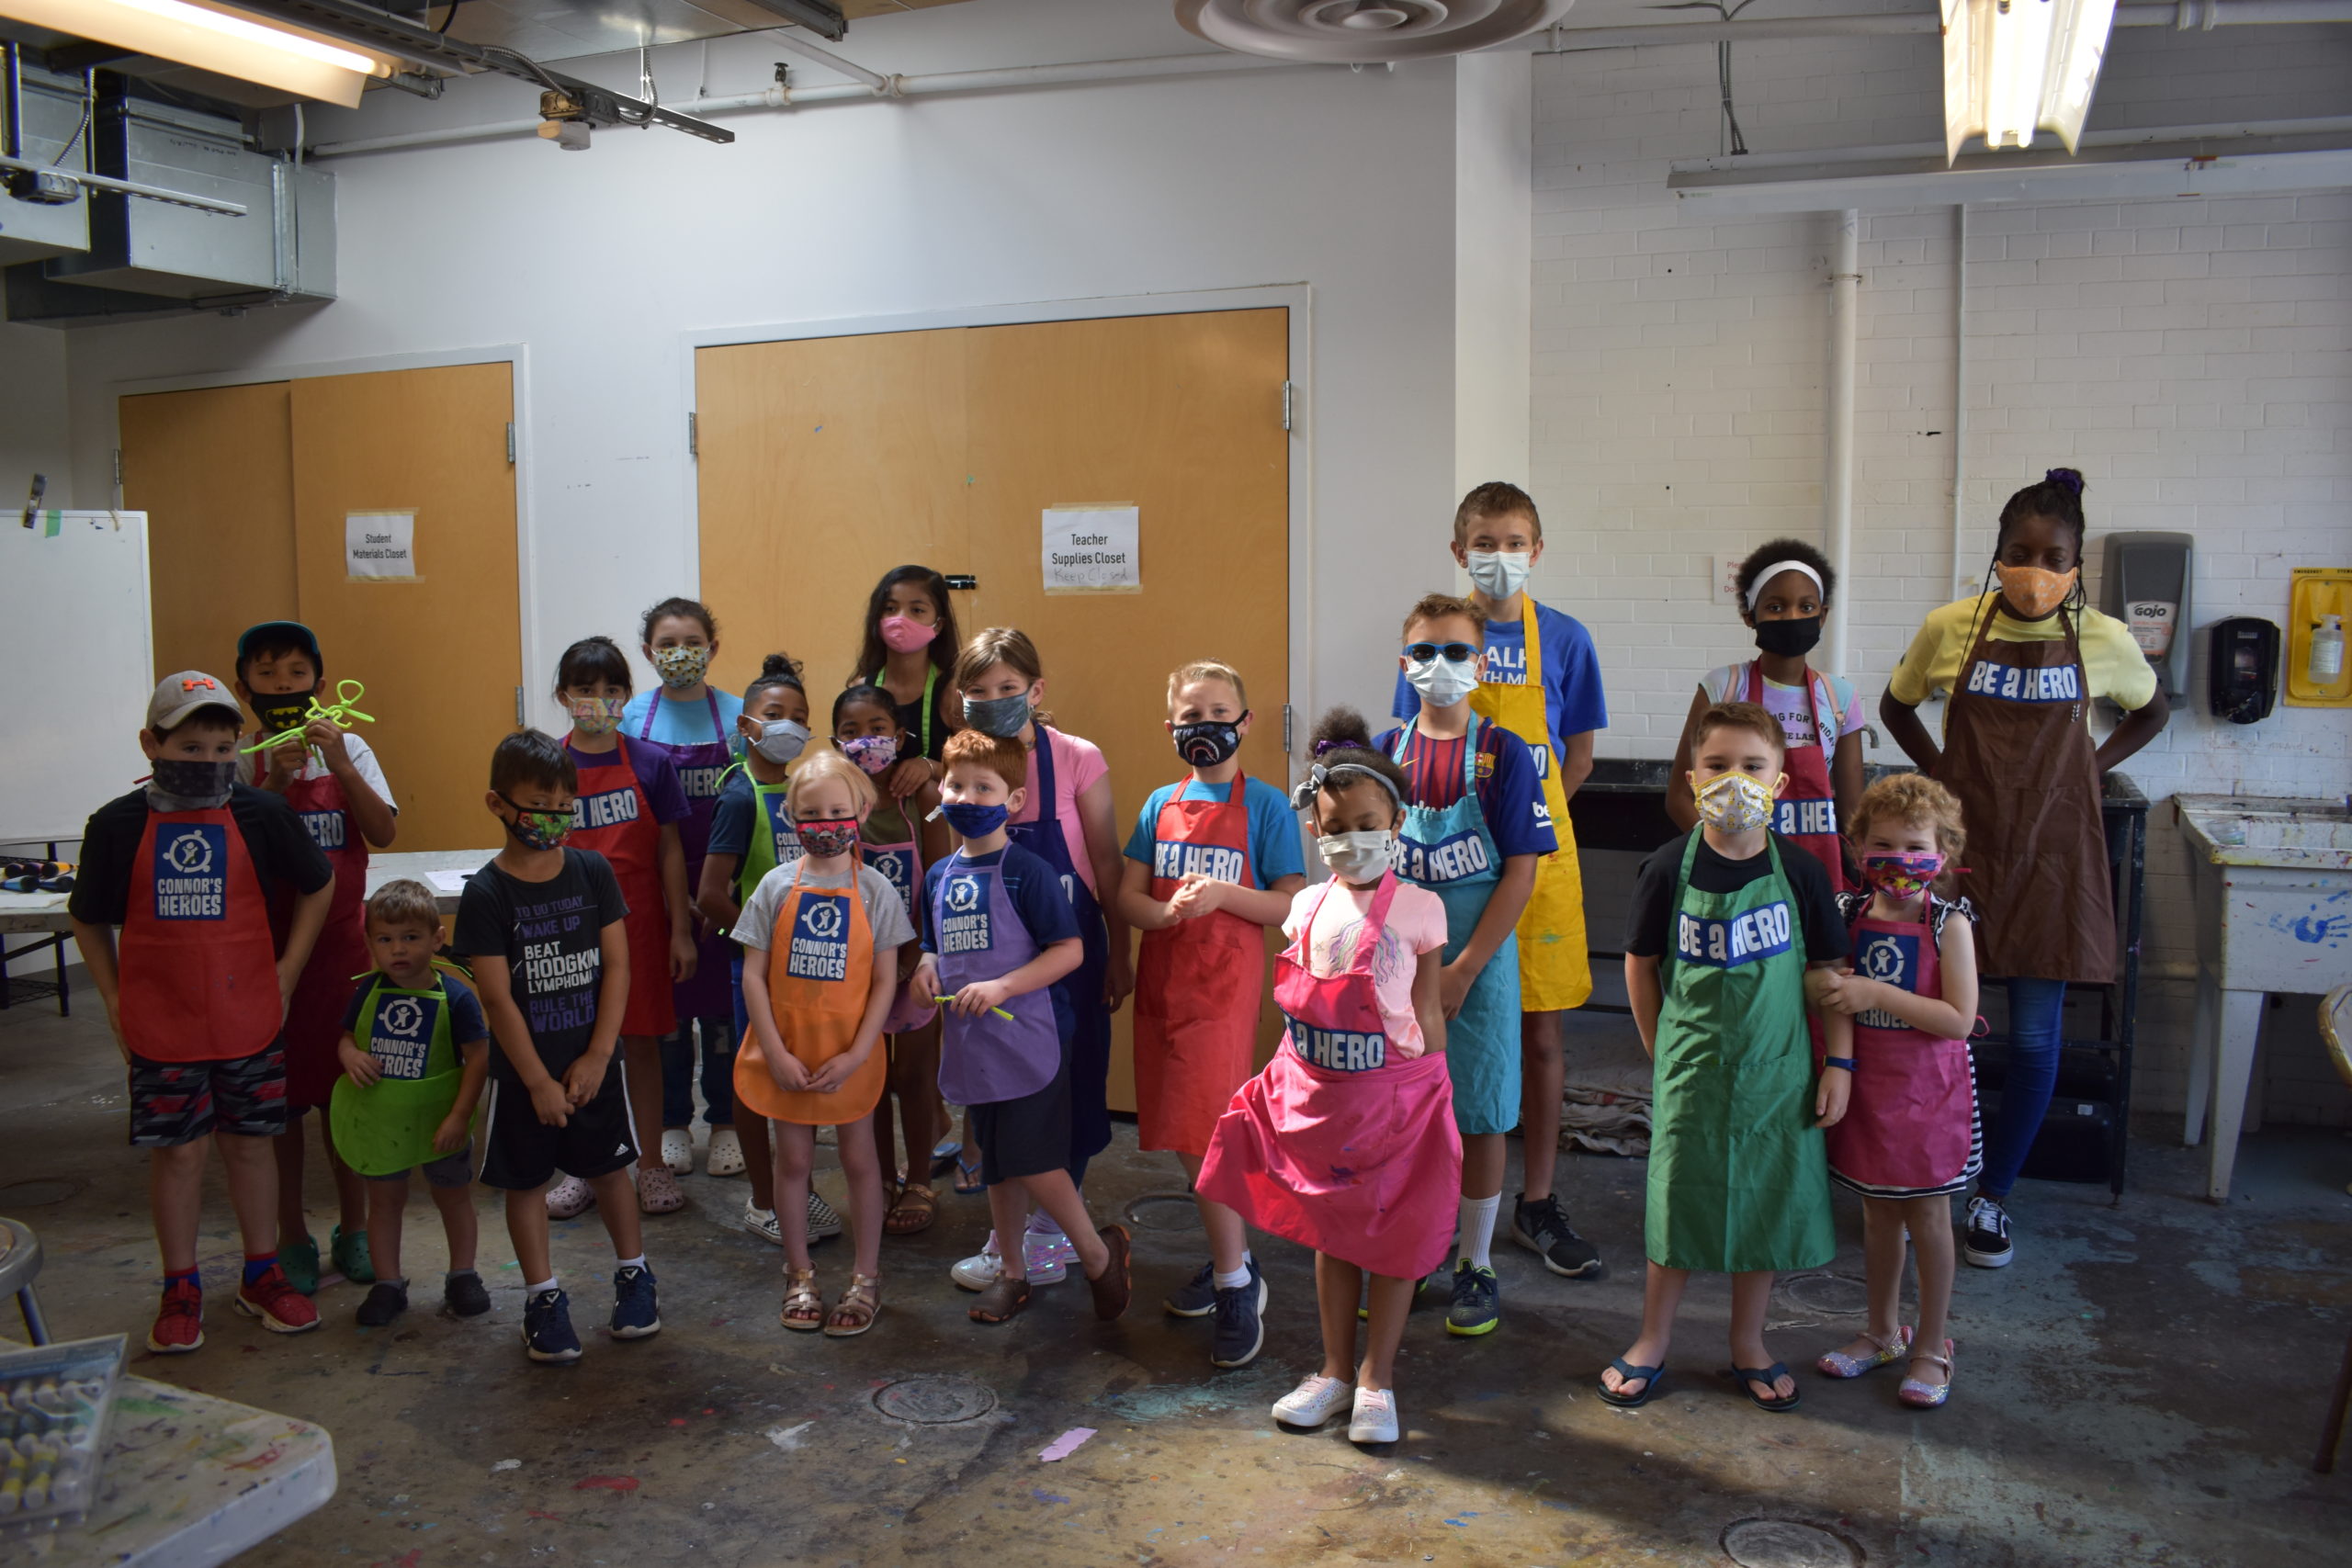 Image a group of 20 children stand together in an art studio